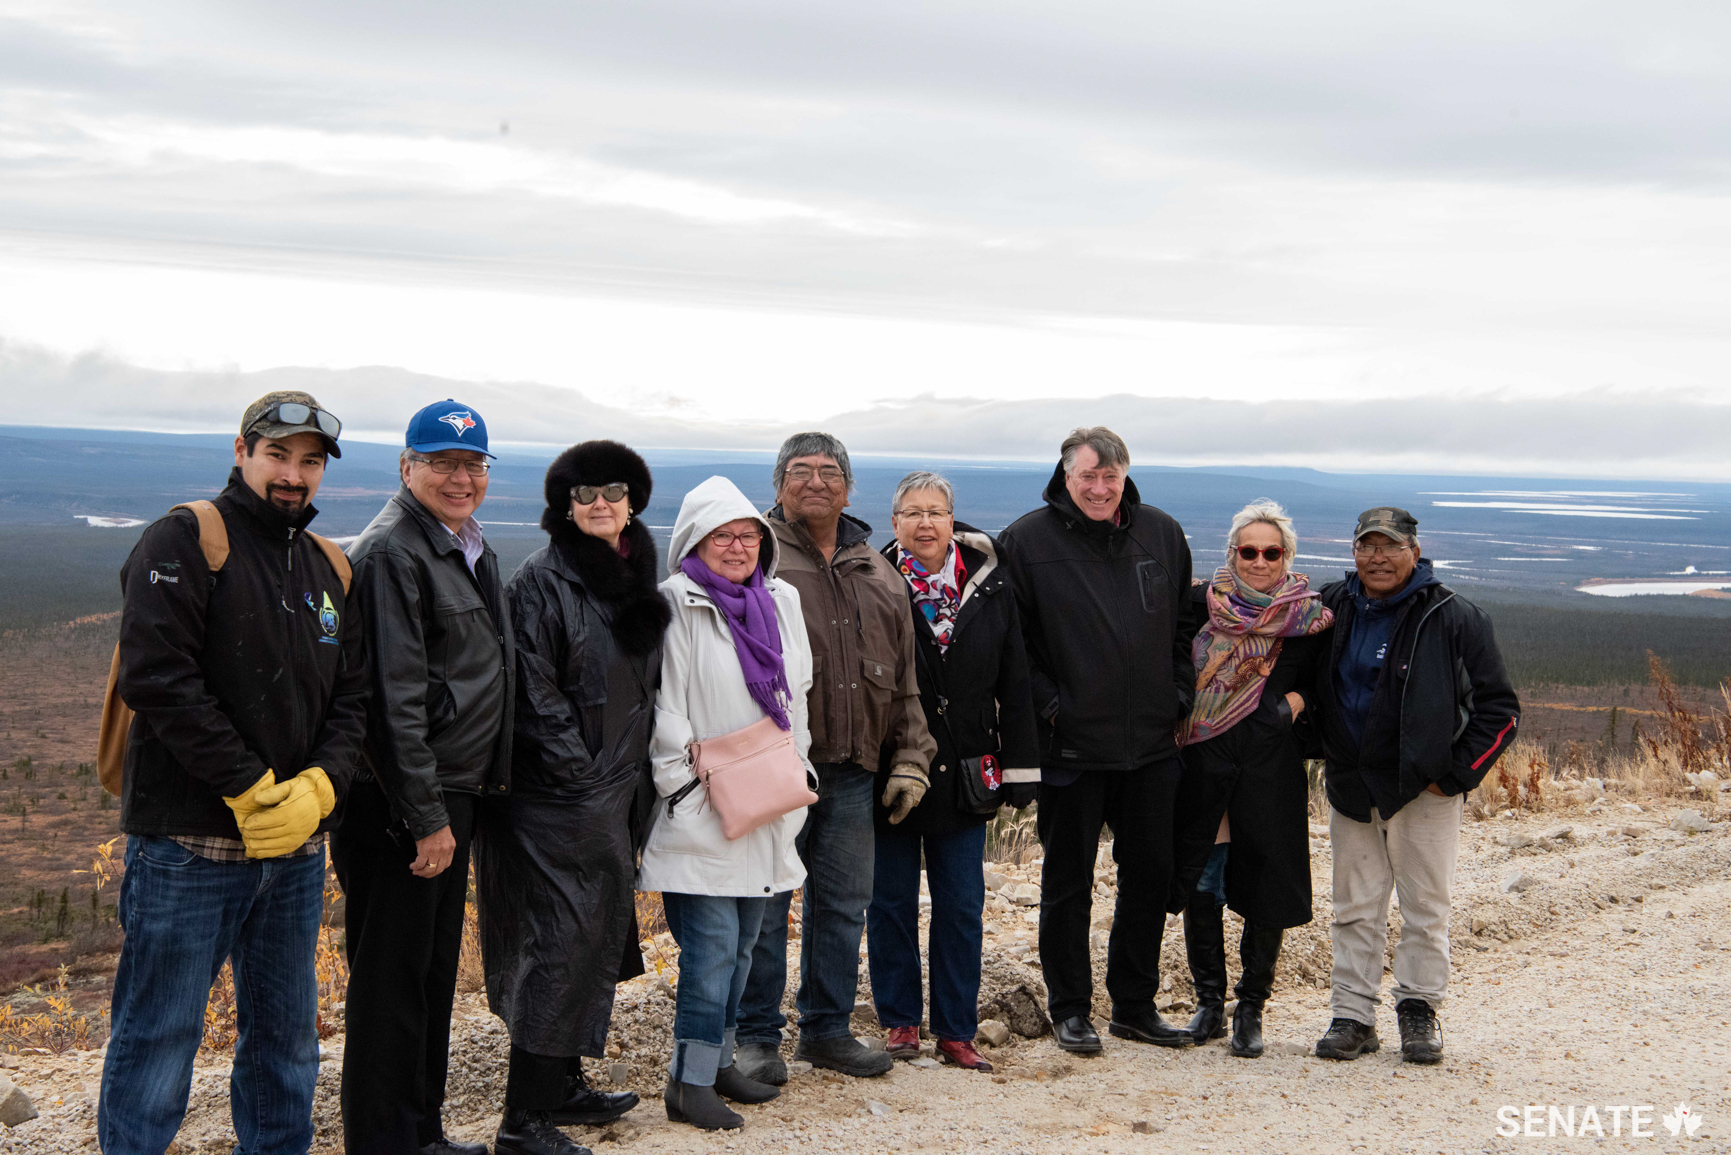 Senators join Old Crow community leaders on a tour to the top of a mountain. During the tour of the community, committee members saw impressive infrastructure including a large solar power project and a centre where researchers are studying permafrost.